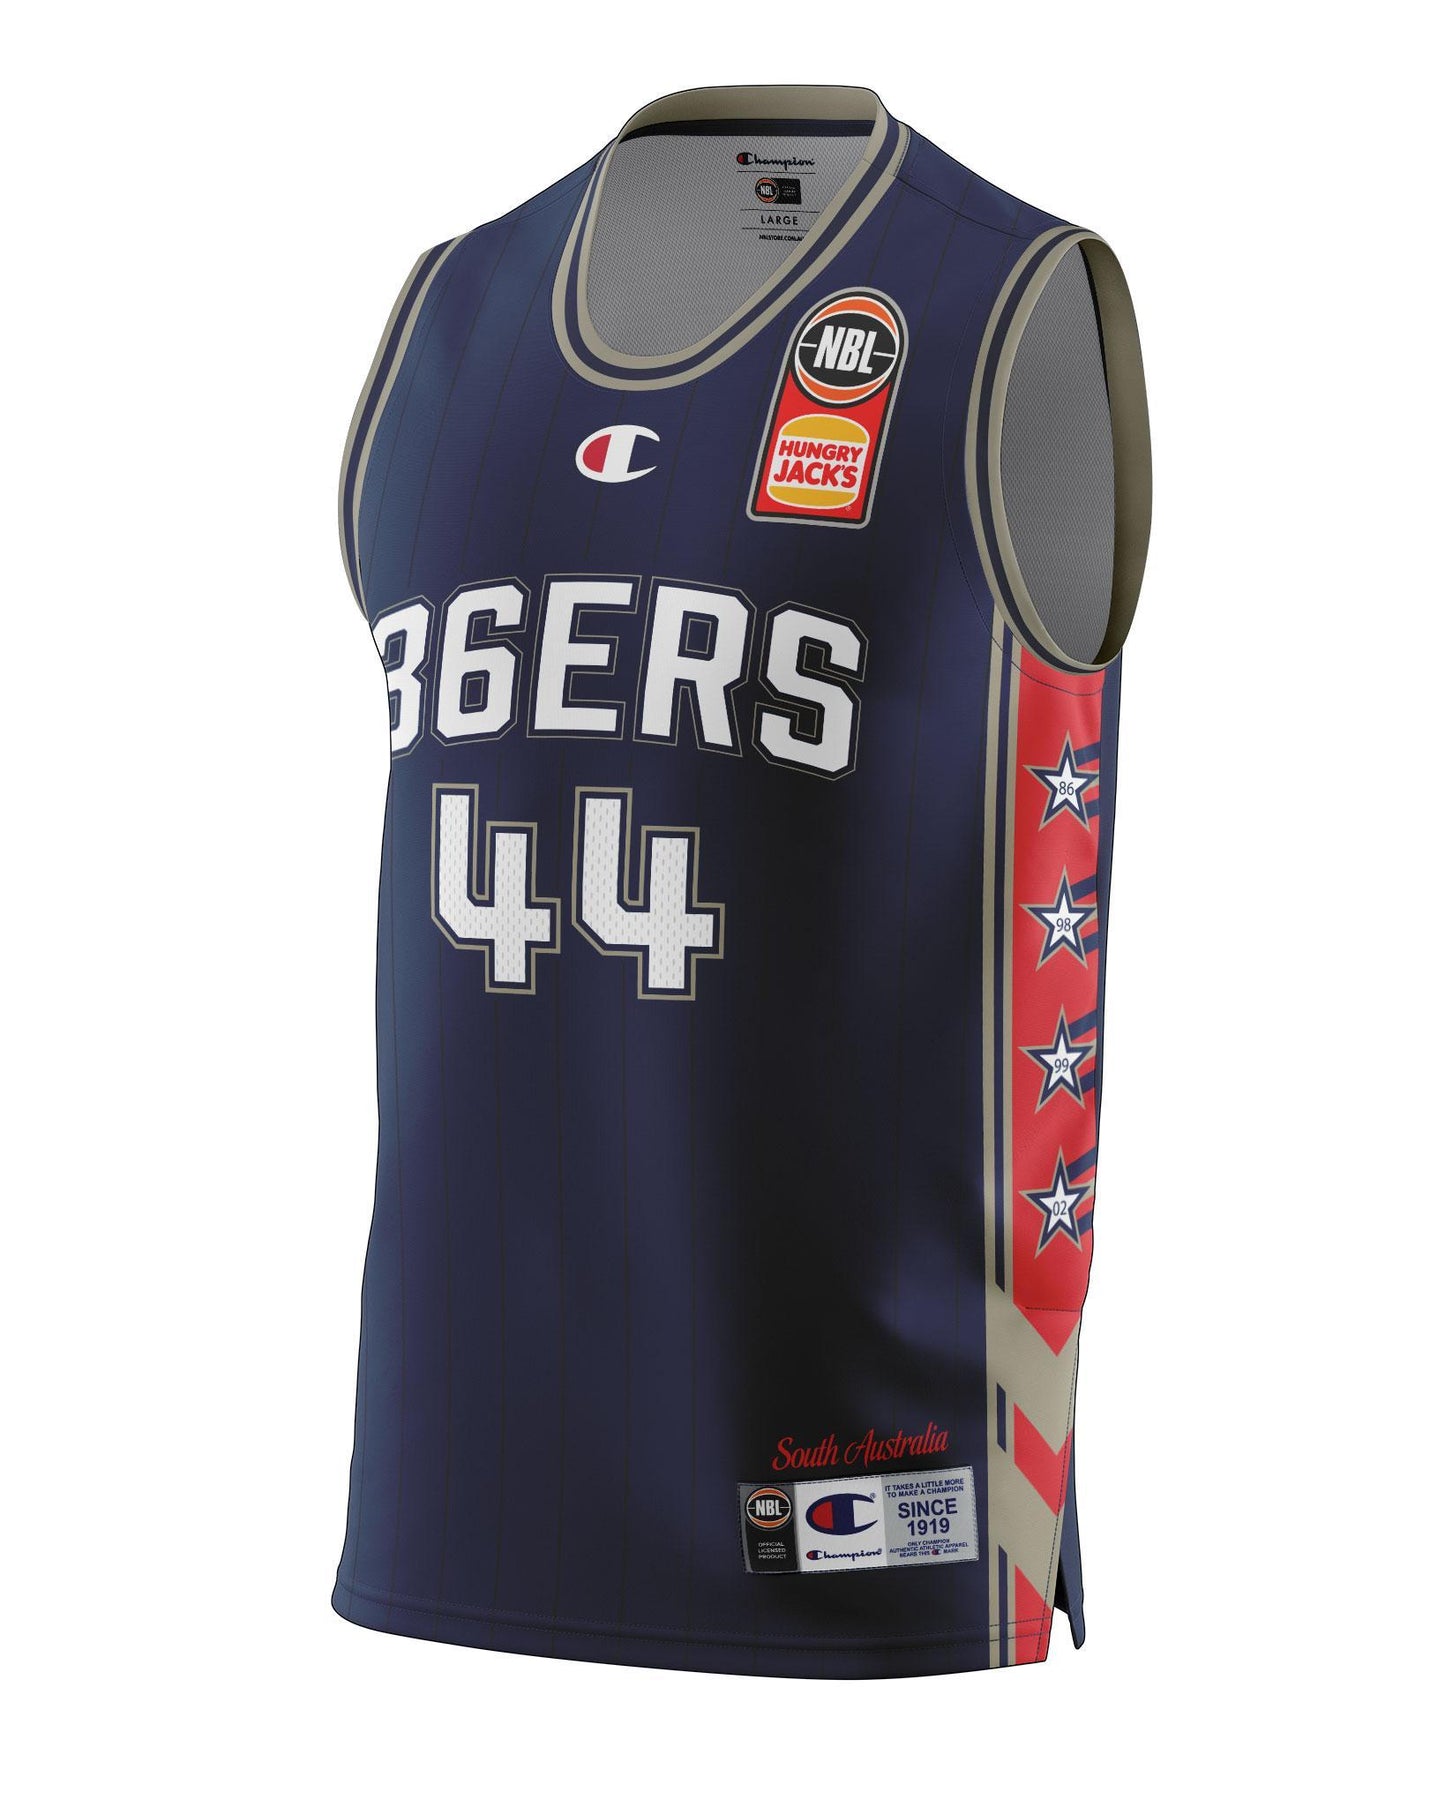 Adelaide 36ers 2021/22 Authentic Adult Home Jersey - Sunday Dech